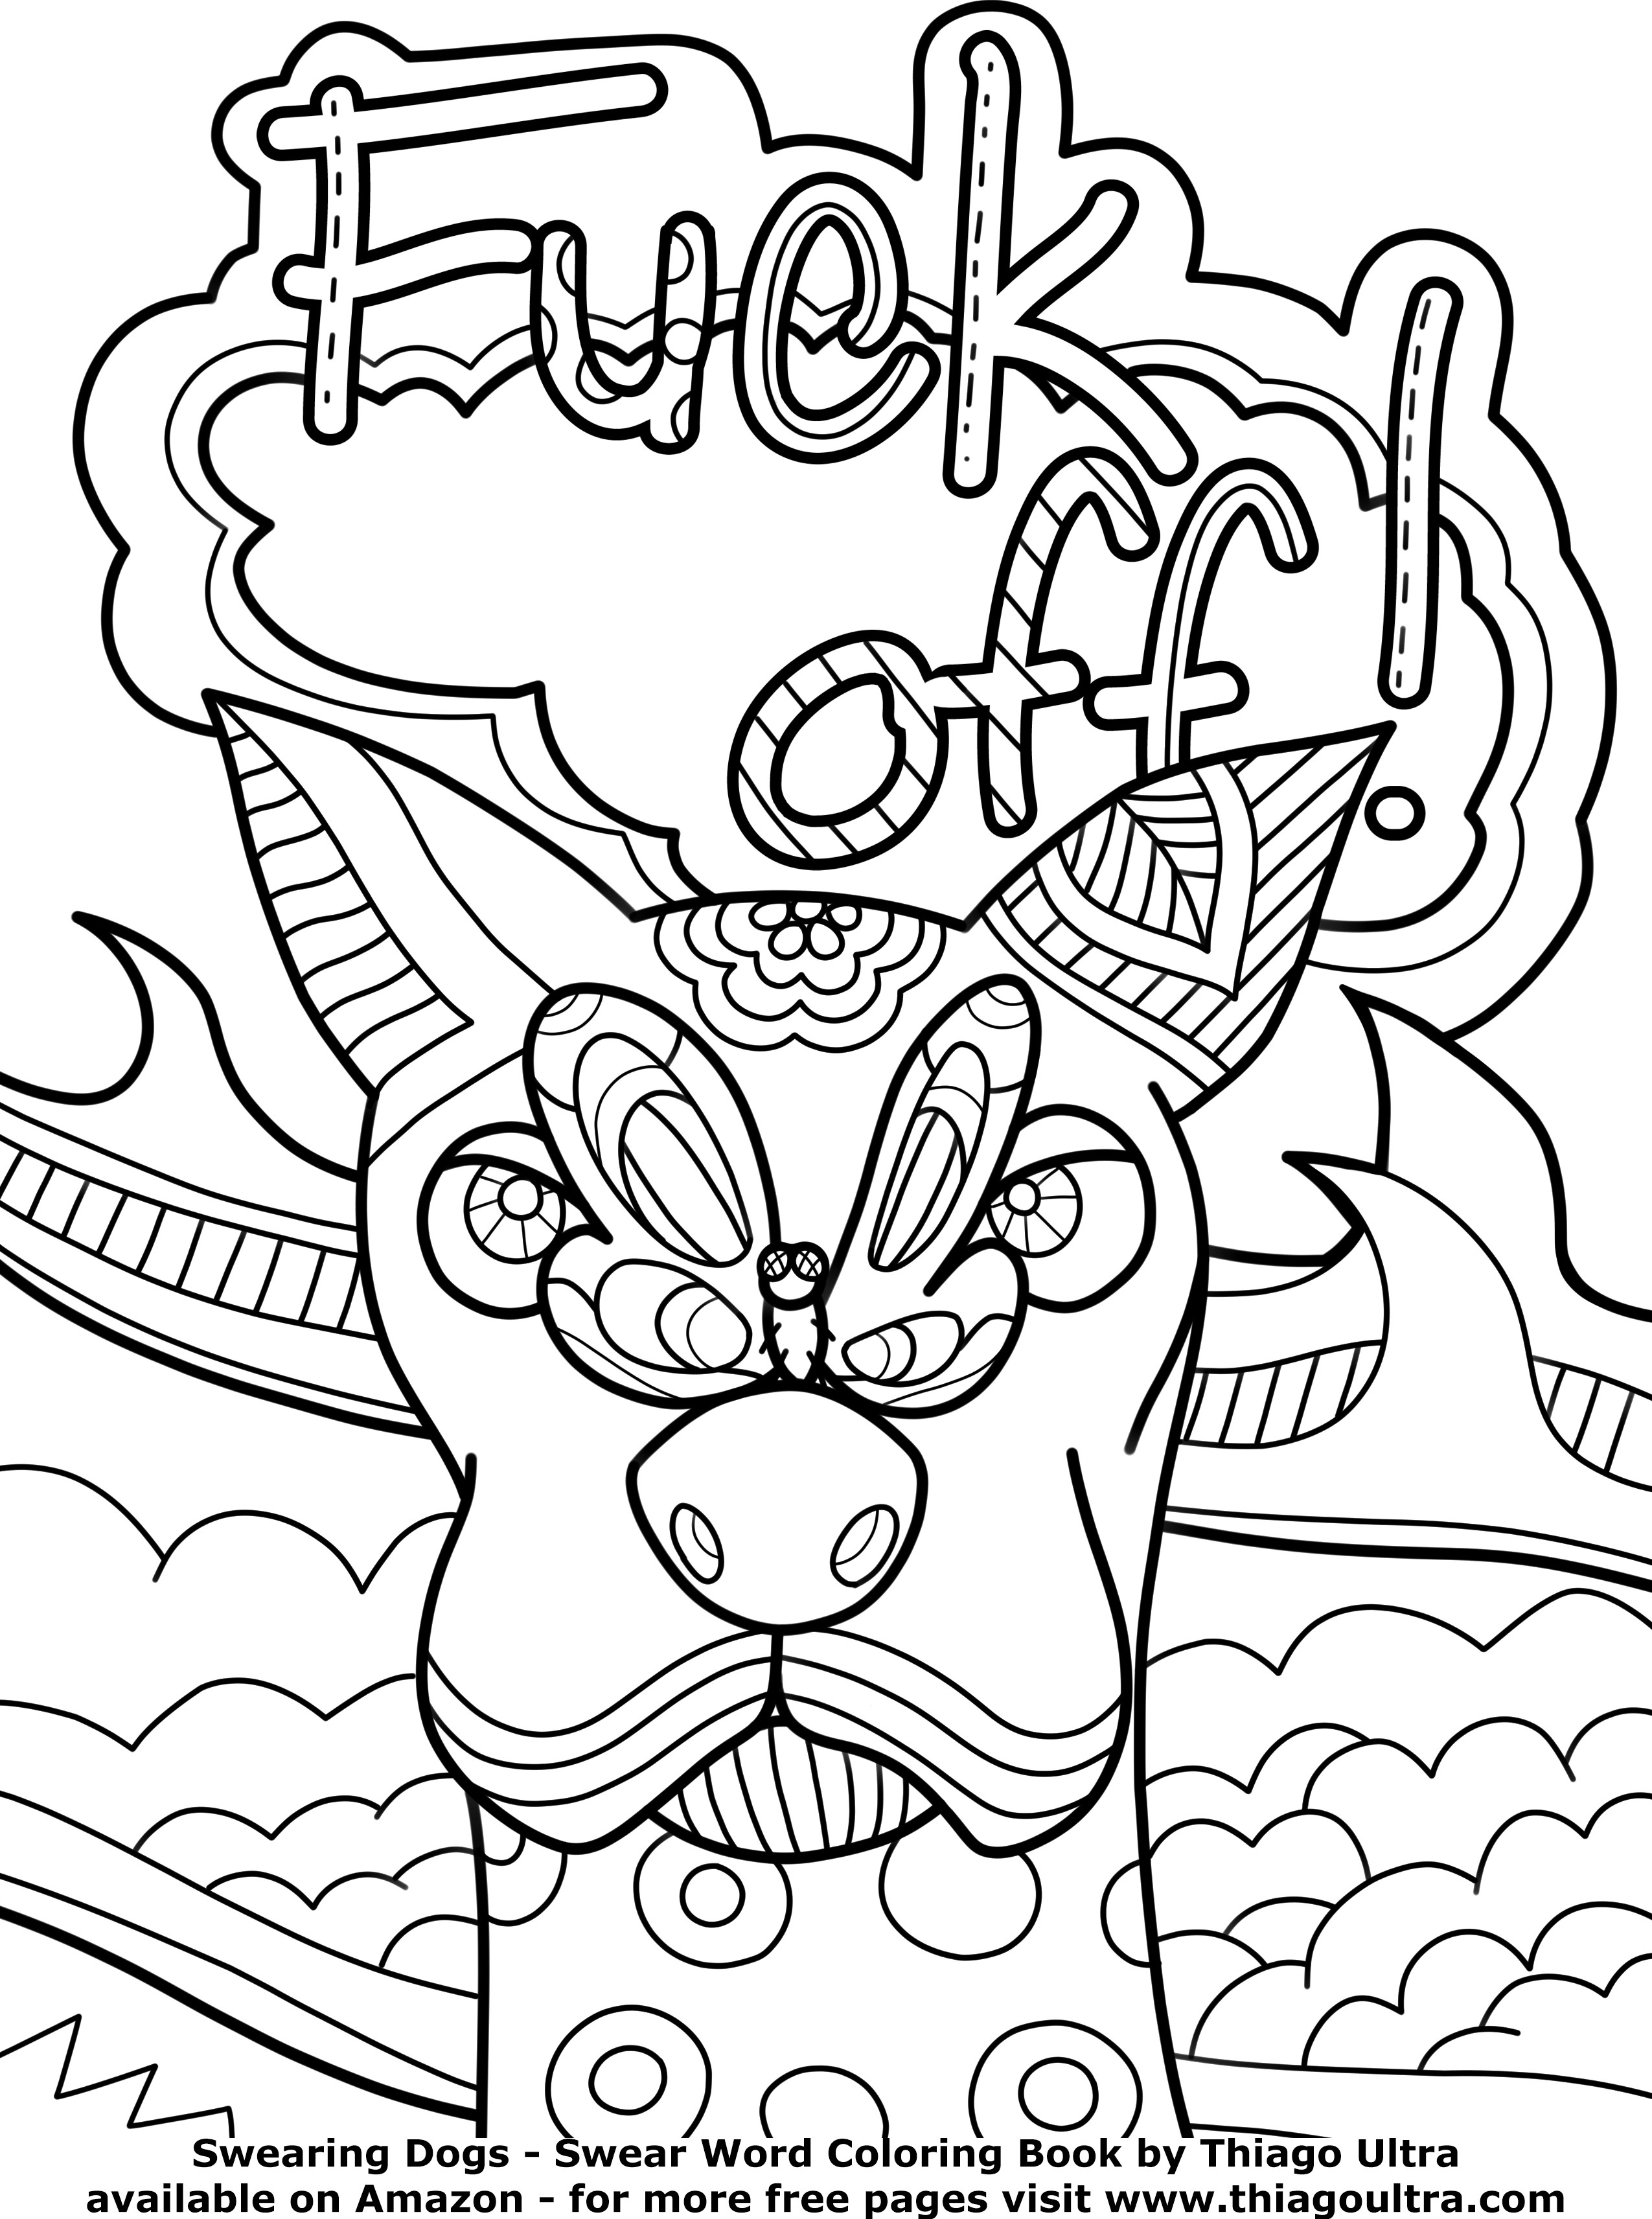 Coloring Pages : Printable Adult Coloring Pages Swear Words Free - Free Printable Coloring Pages For Adults Swear Words